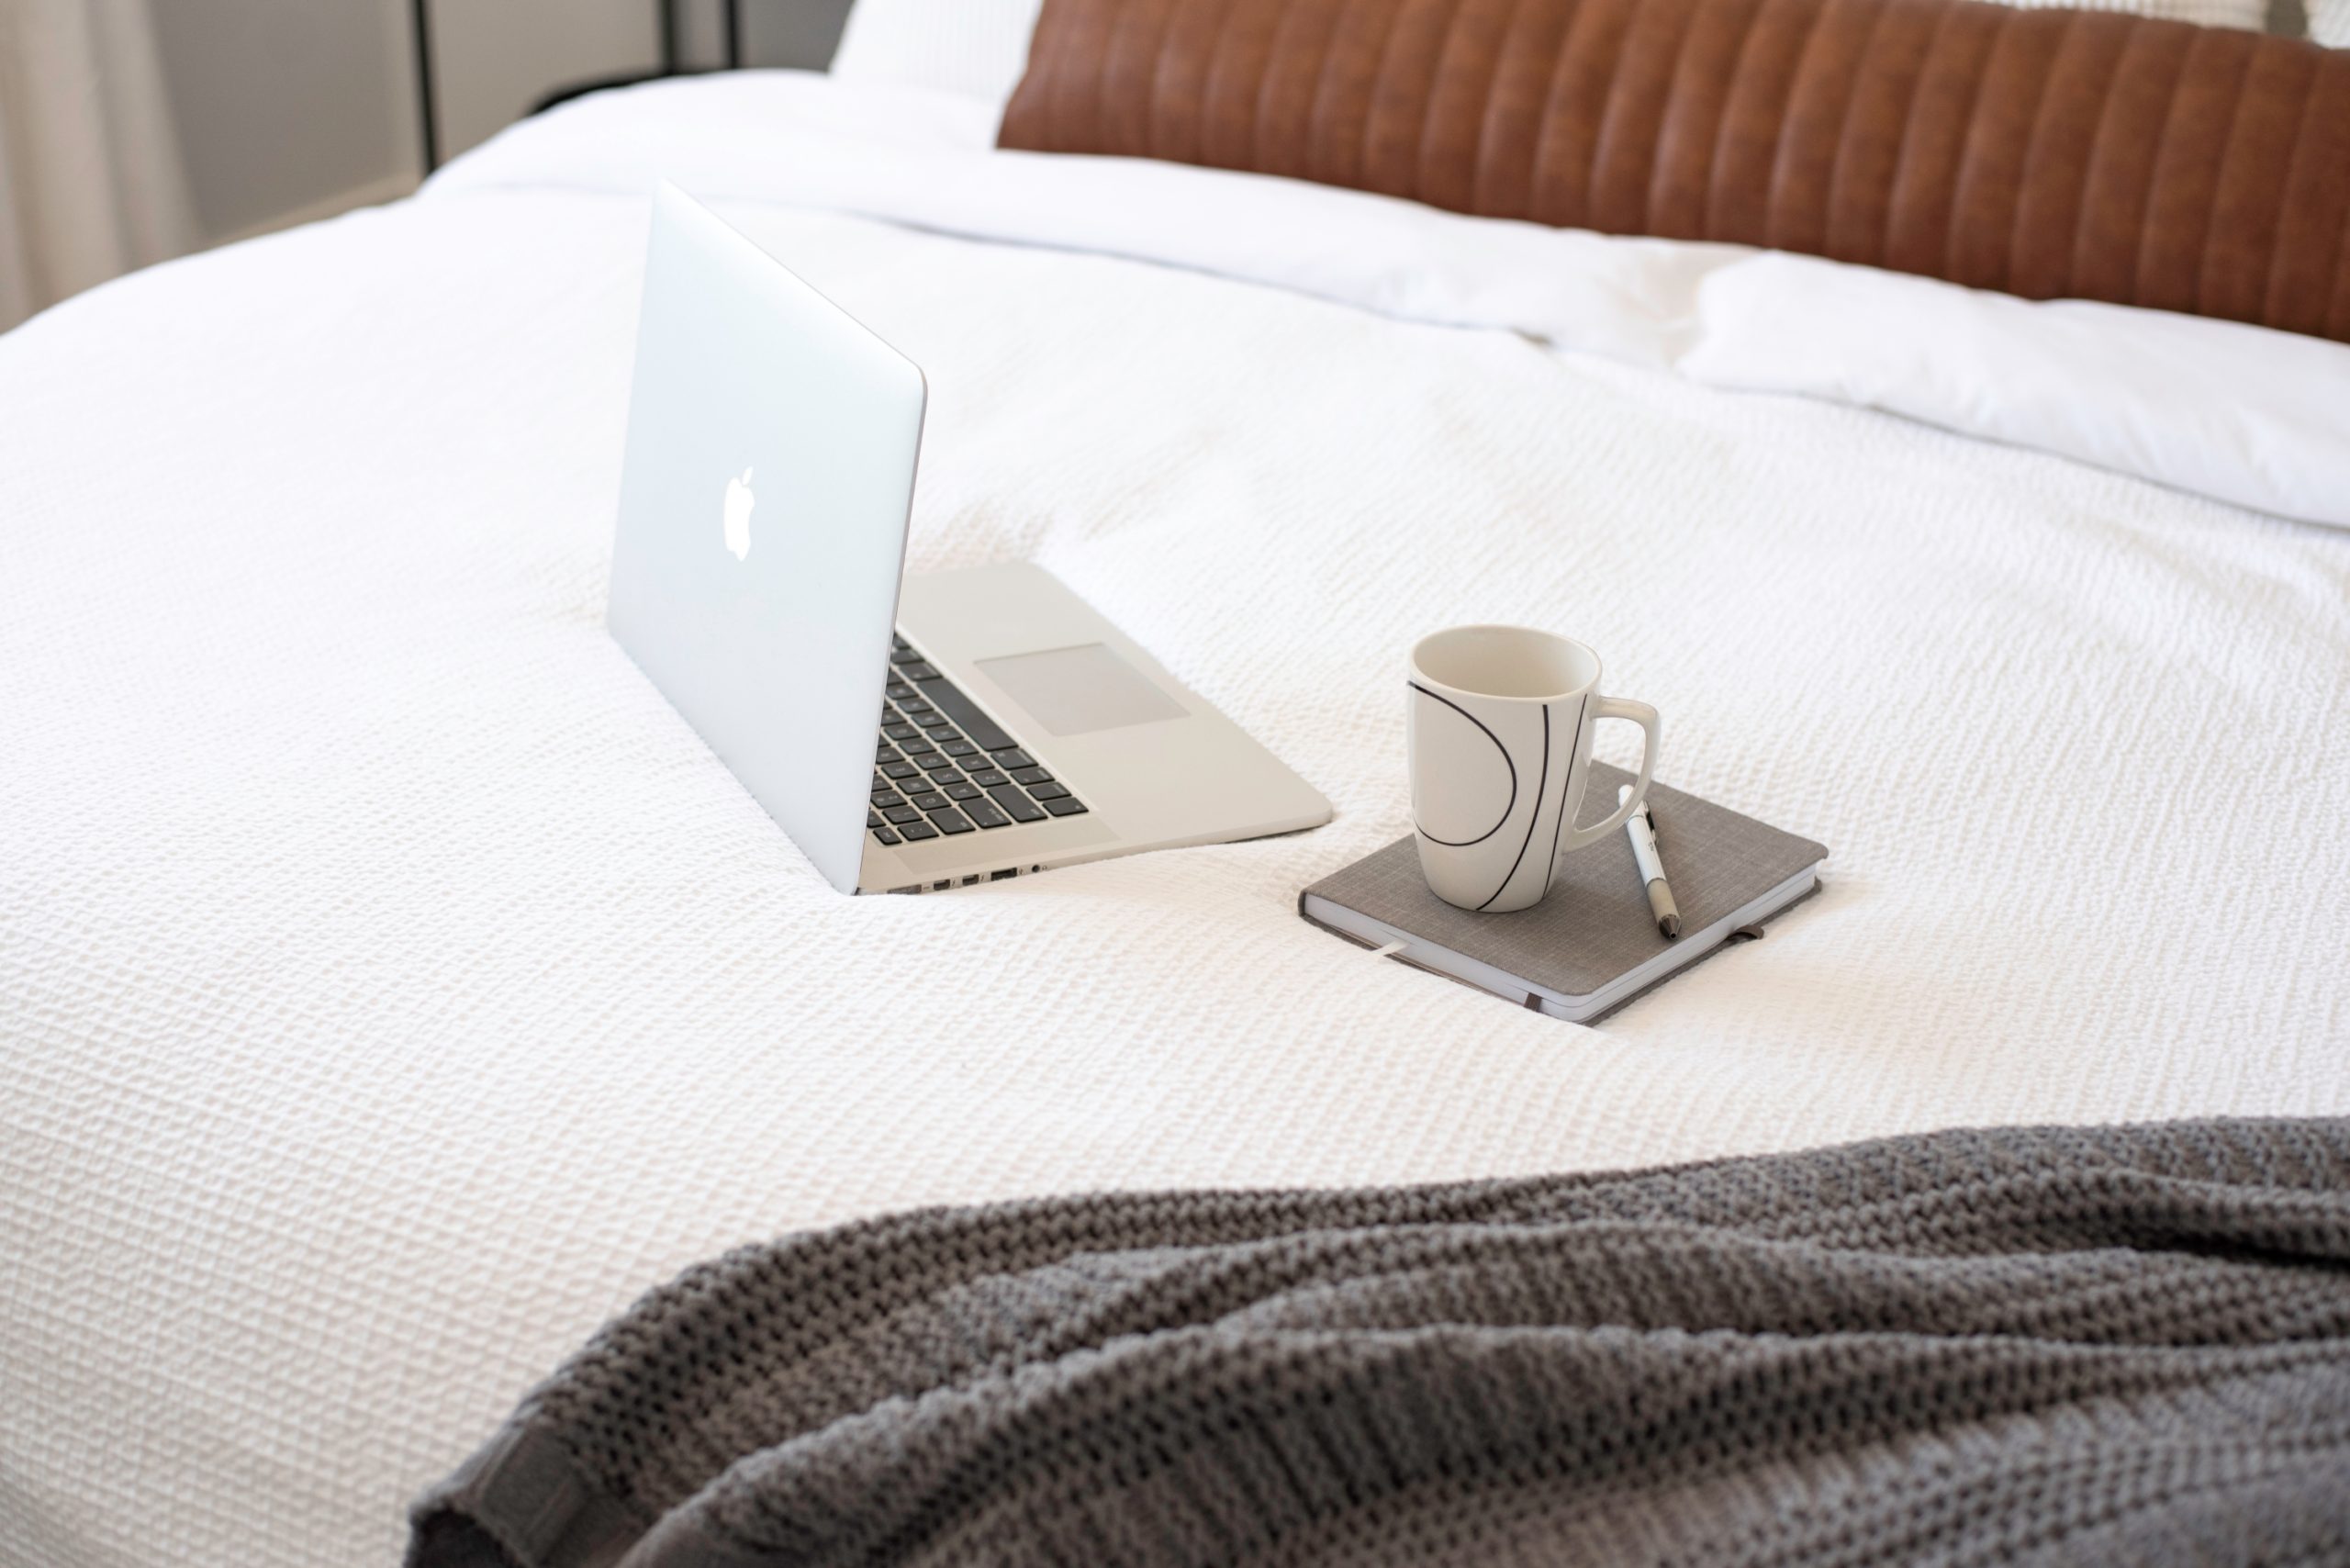 laptop journal and coffee mug on a white bed with gray comforter